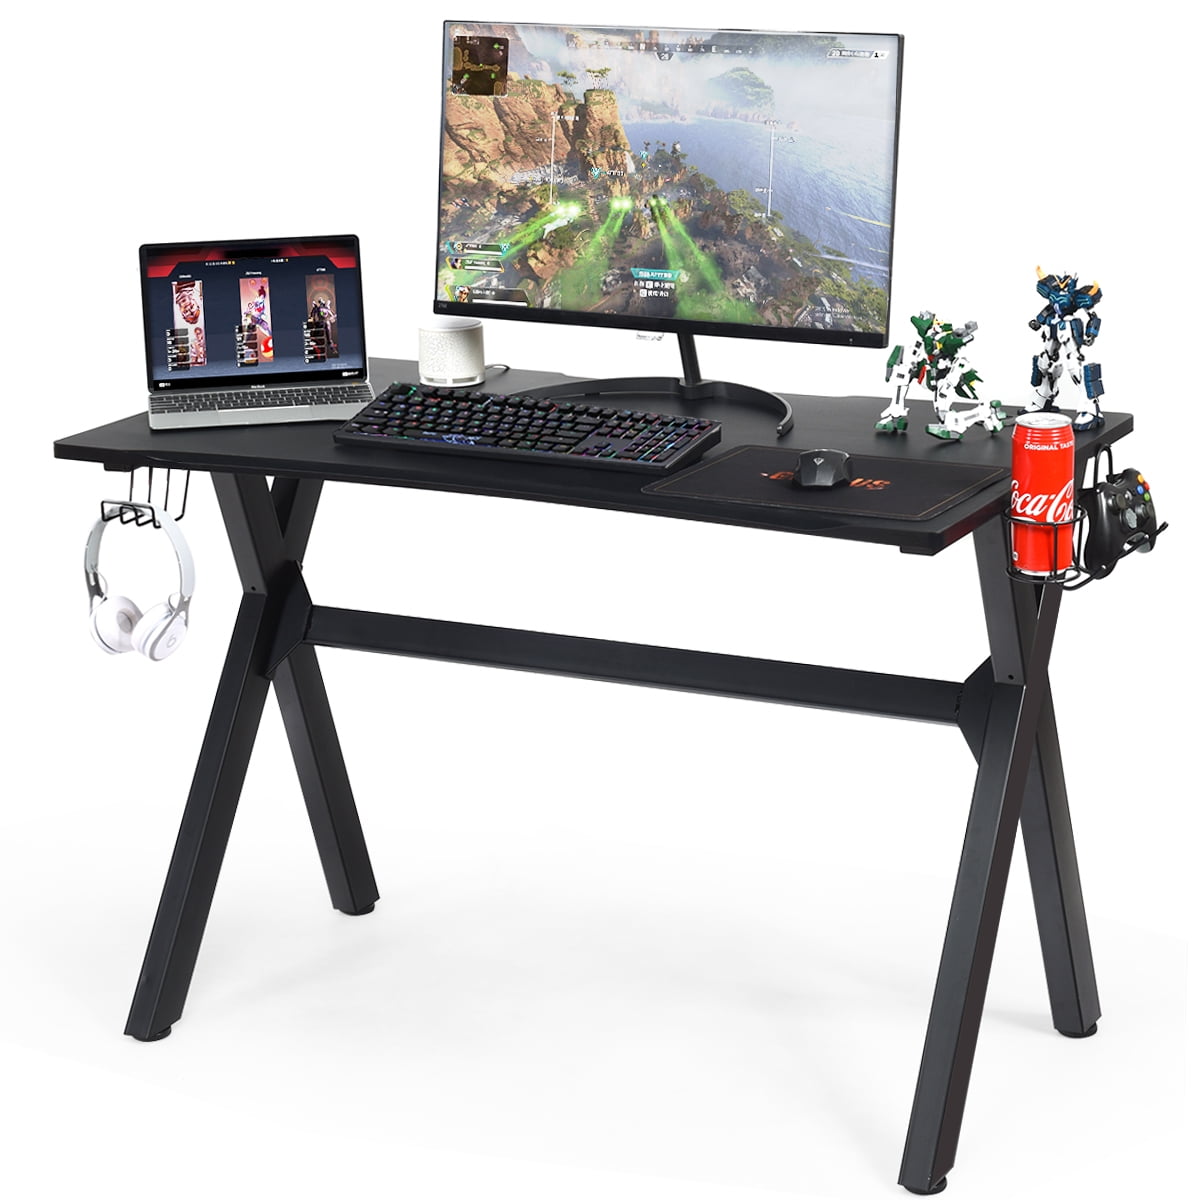 Details about   55" Large Gaming Desk Home Office Computer Table w/Cup Controller Headset Holder 